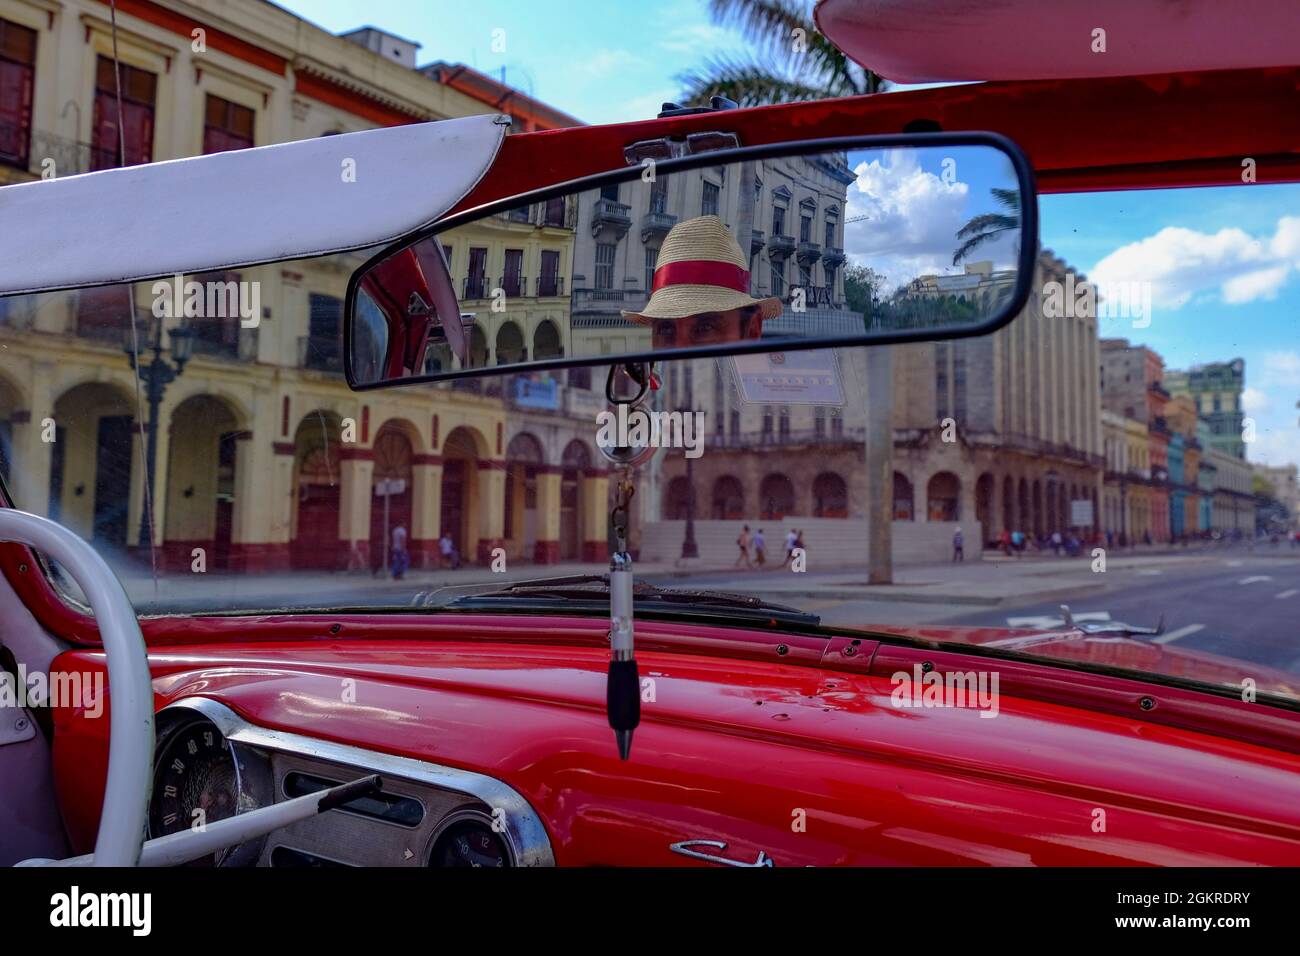 Taxi driver in straw hat seen in rear-view mirror of vintage car, Havana, Cuba, West Indies, Central America Stock Photo